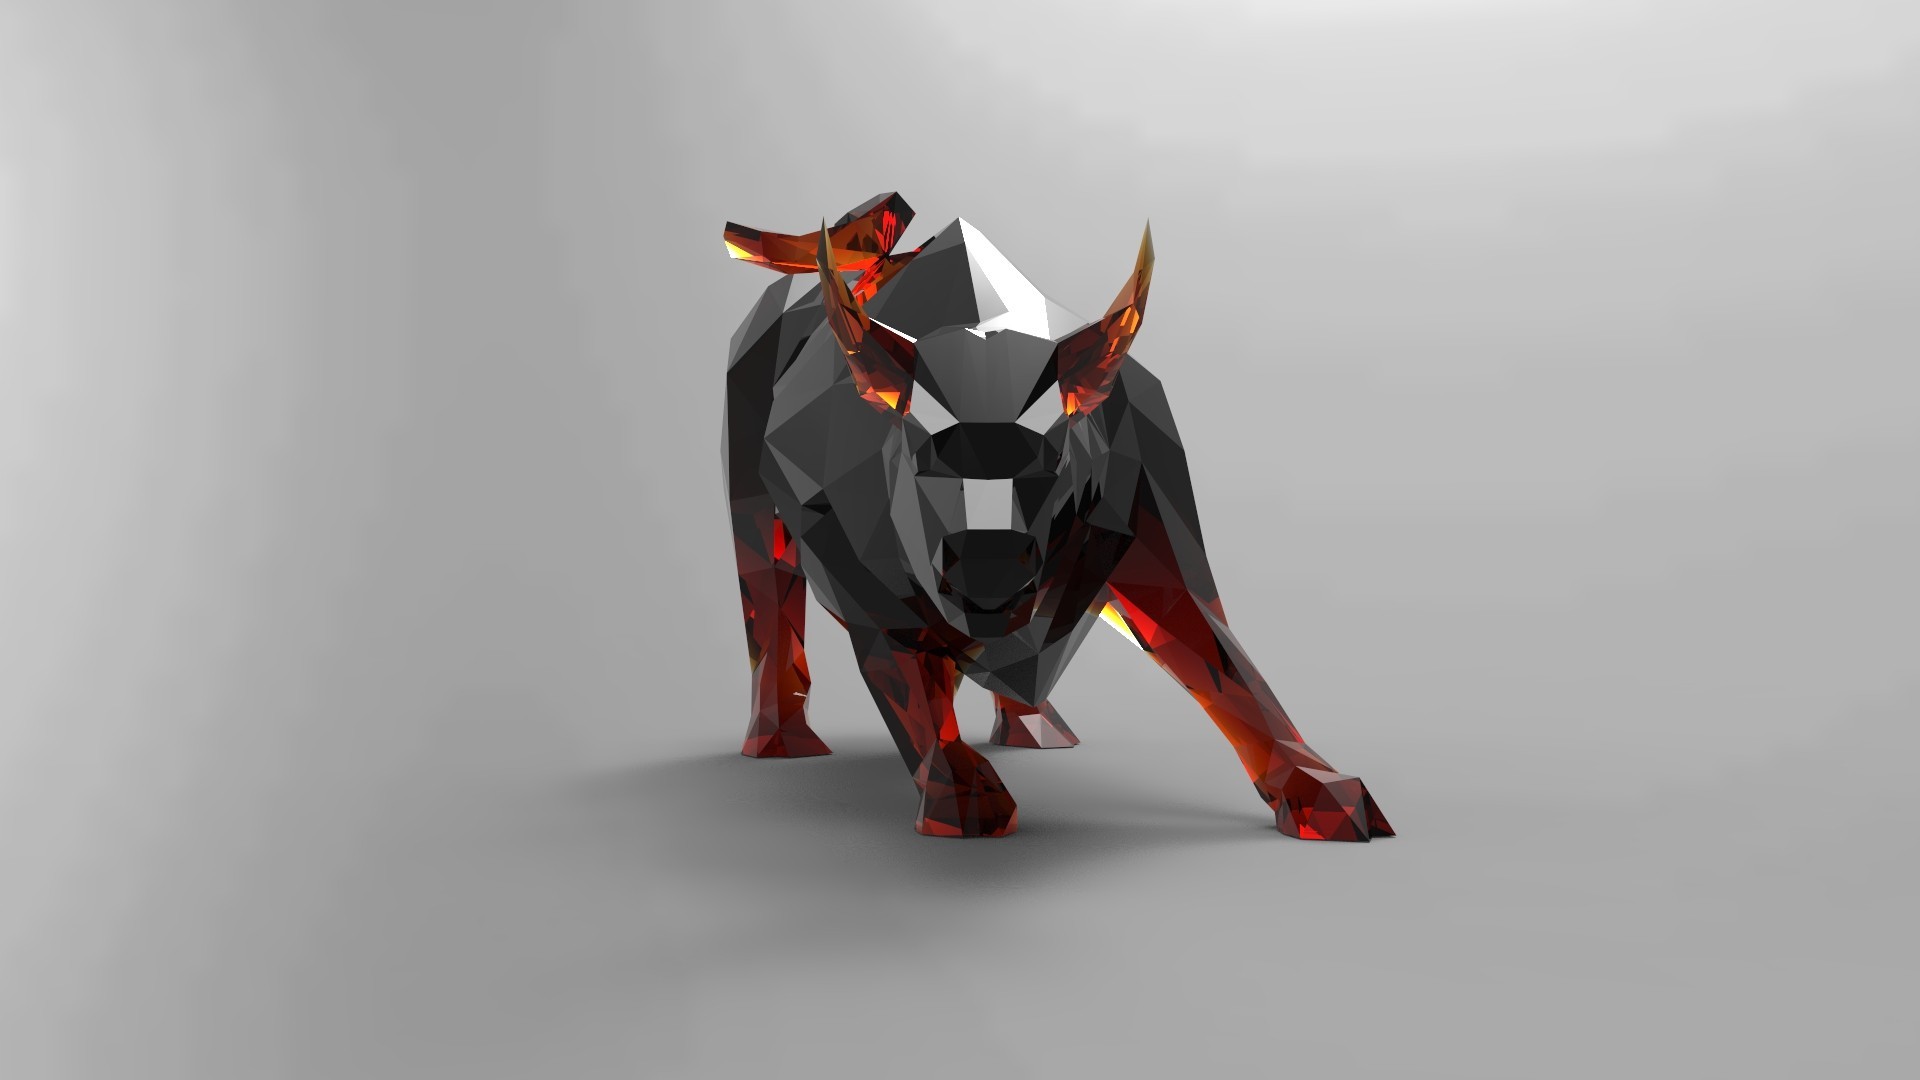 1920x1080 The Wall Street Bull. The original model. The model is ready for 3D  printing. Low poly. High quality low poly 3D model of Bear.